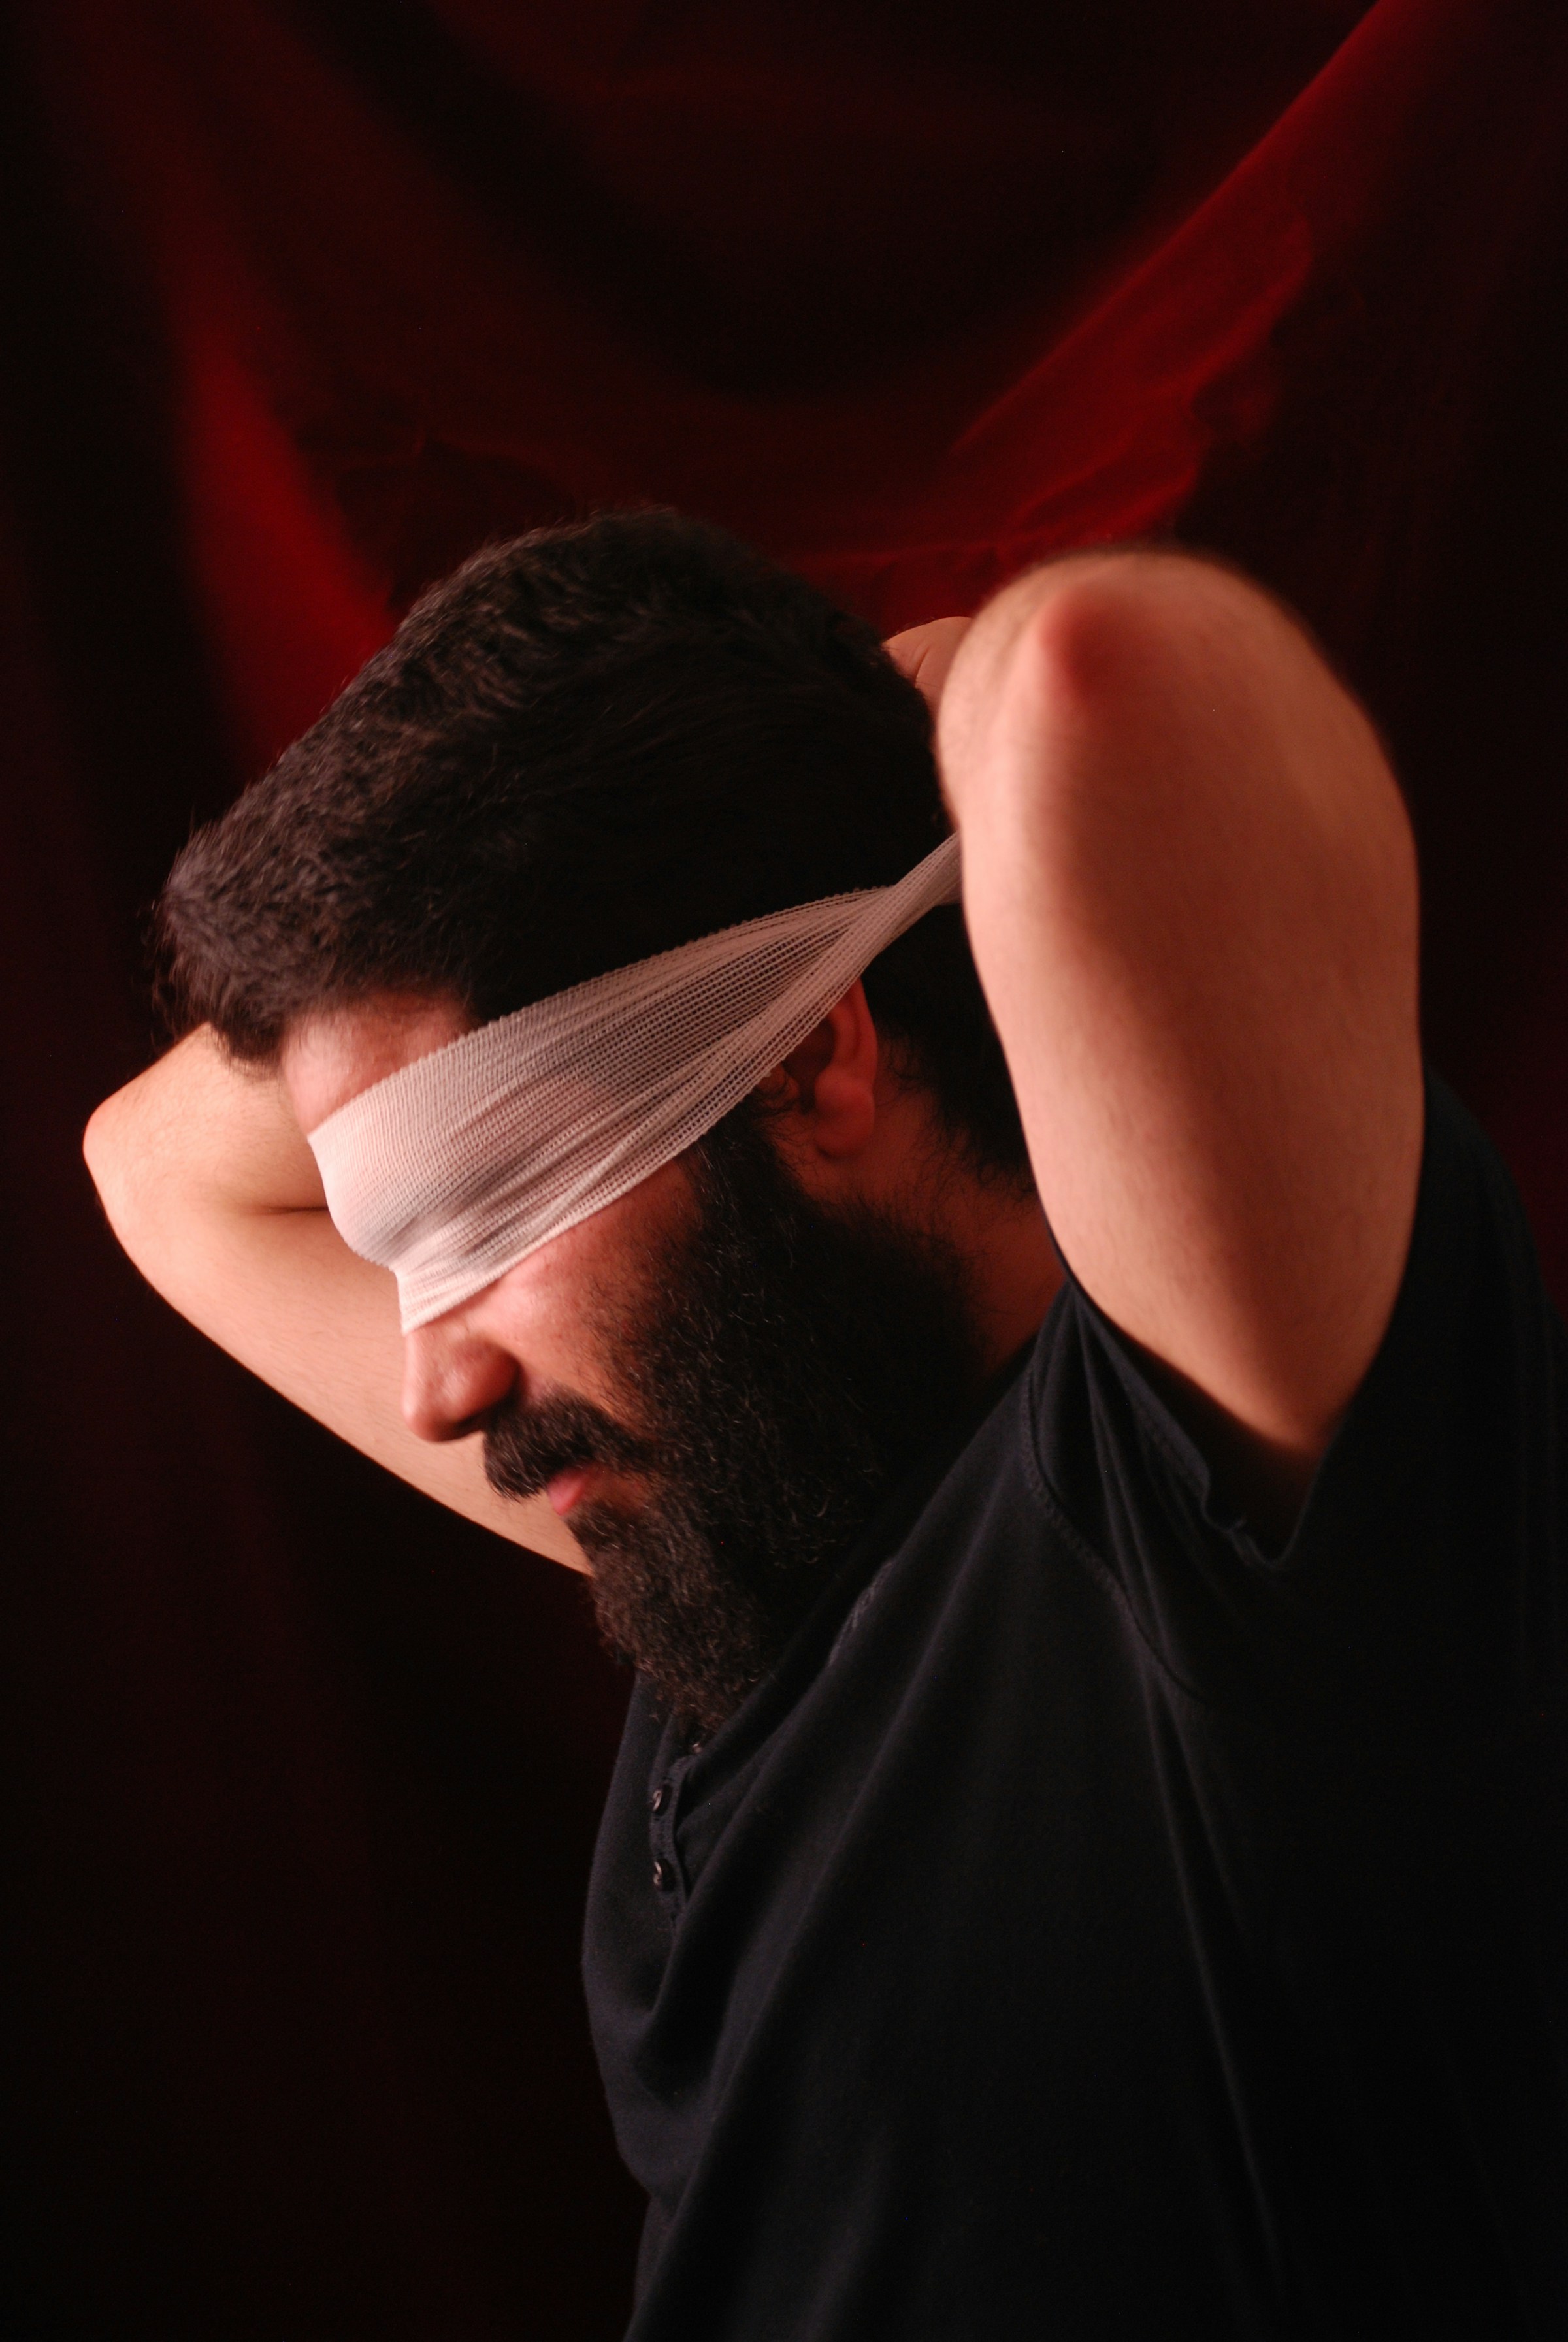 Man with a blindfold | Source: Unsplash